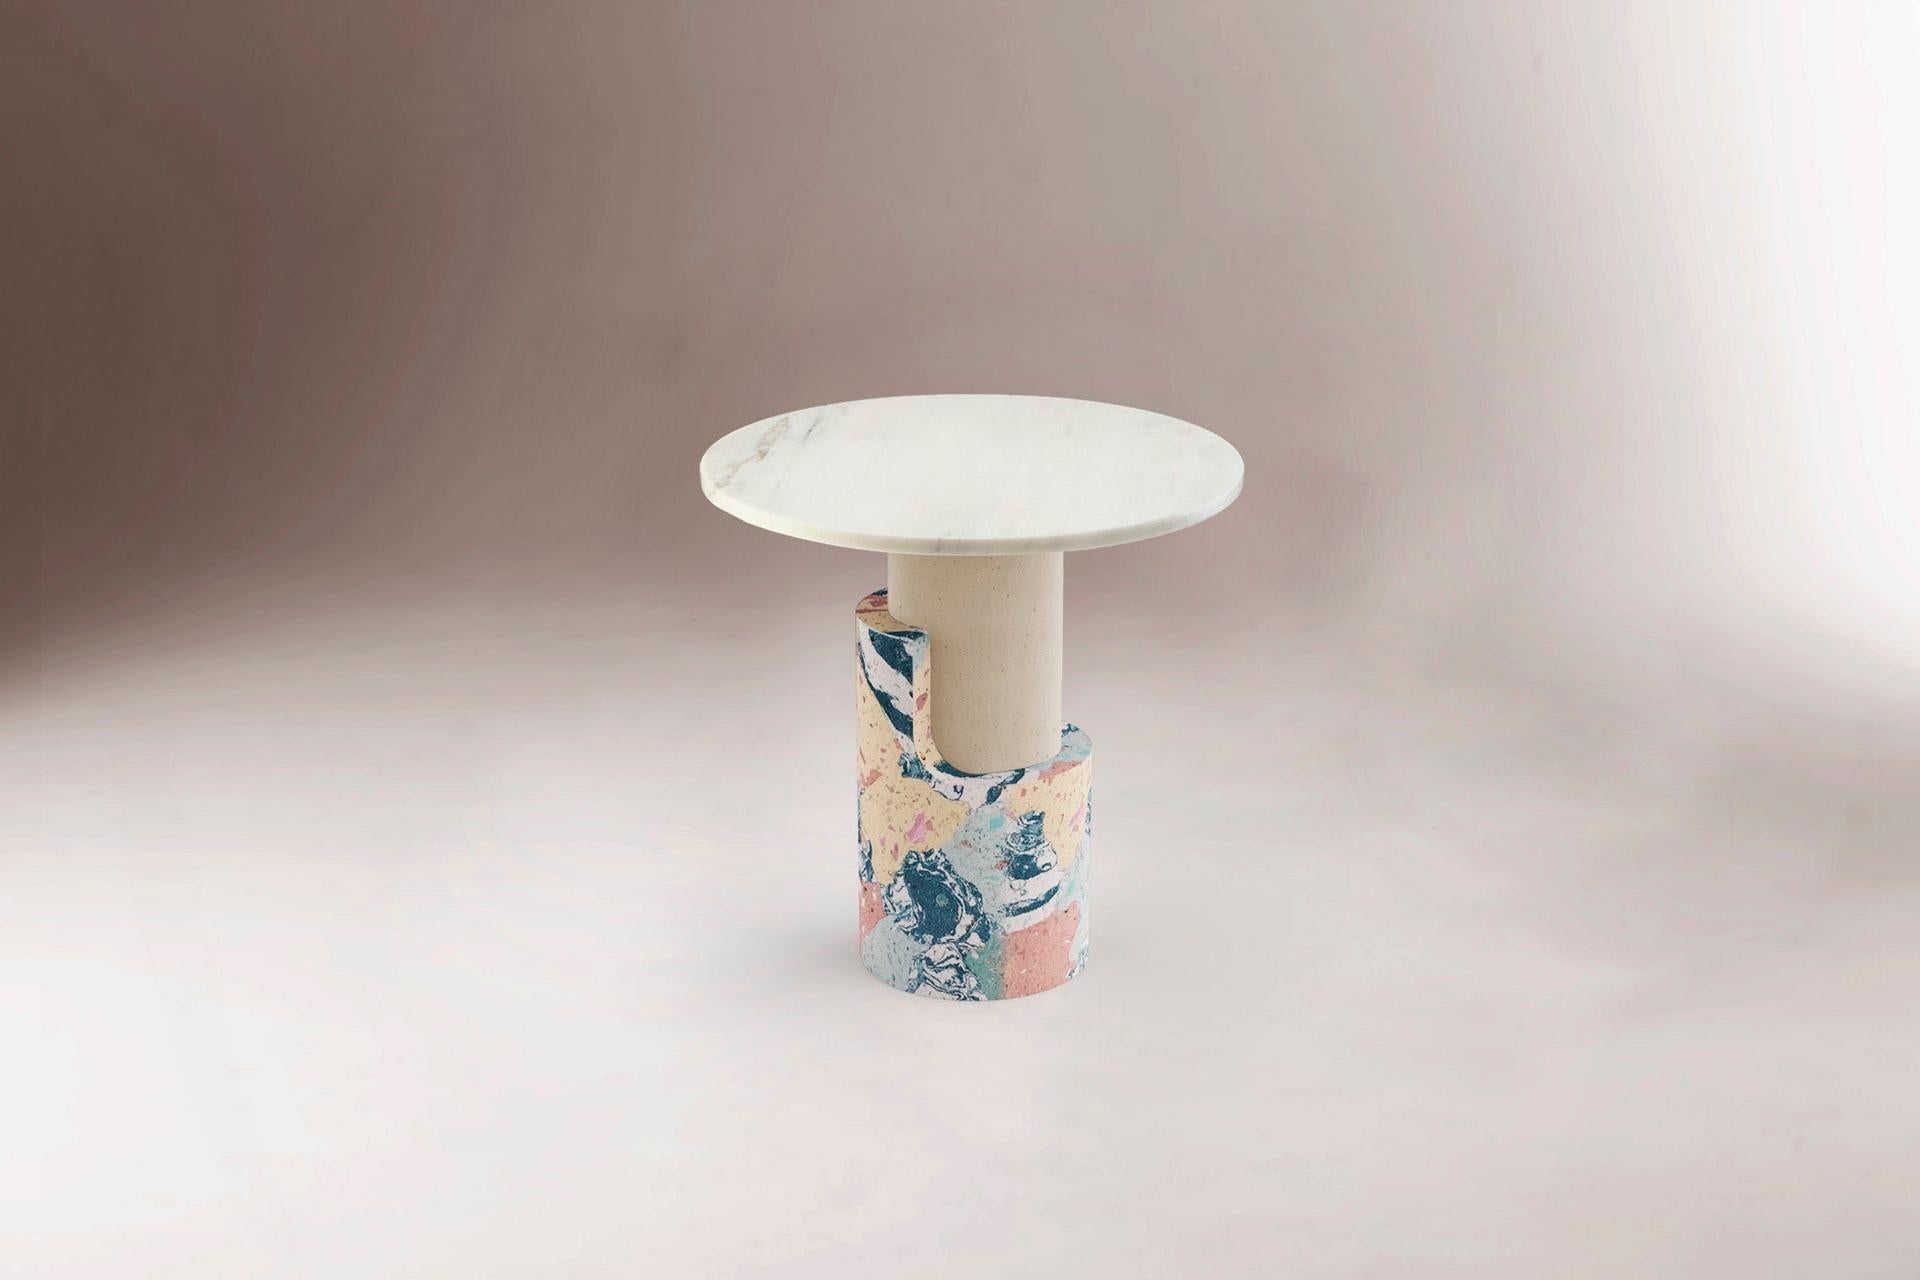 Braque Contemporary Marble Side Table by Dooq
Dimensions: W 60 x D 60 x H 55 cm
Materials: Entirely hand made in marble

Product
The Braque Side Table is an elegant and slick side table created by Dooq. Braque is entirely hand made in marble, with a